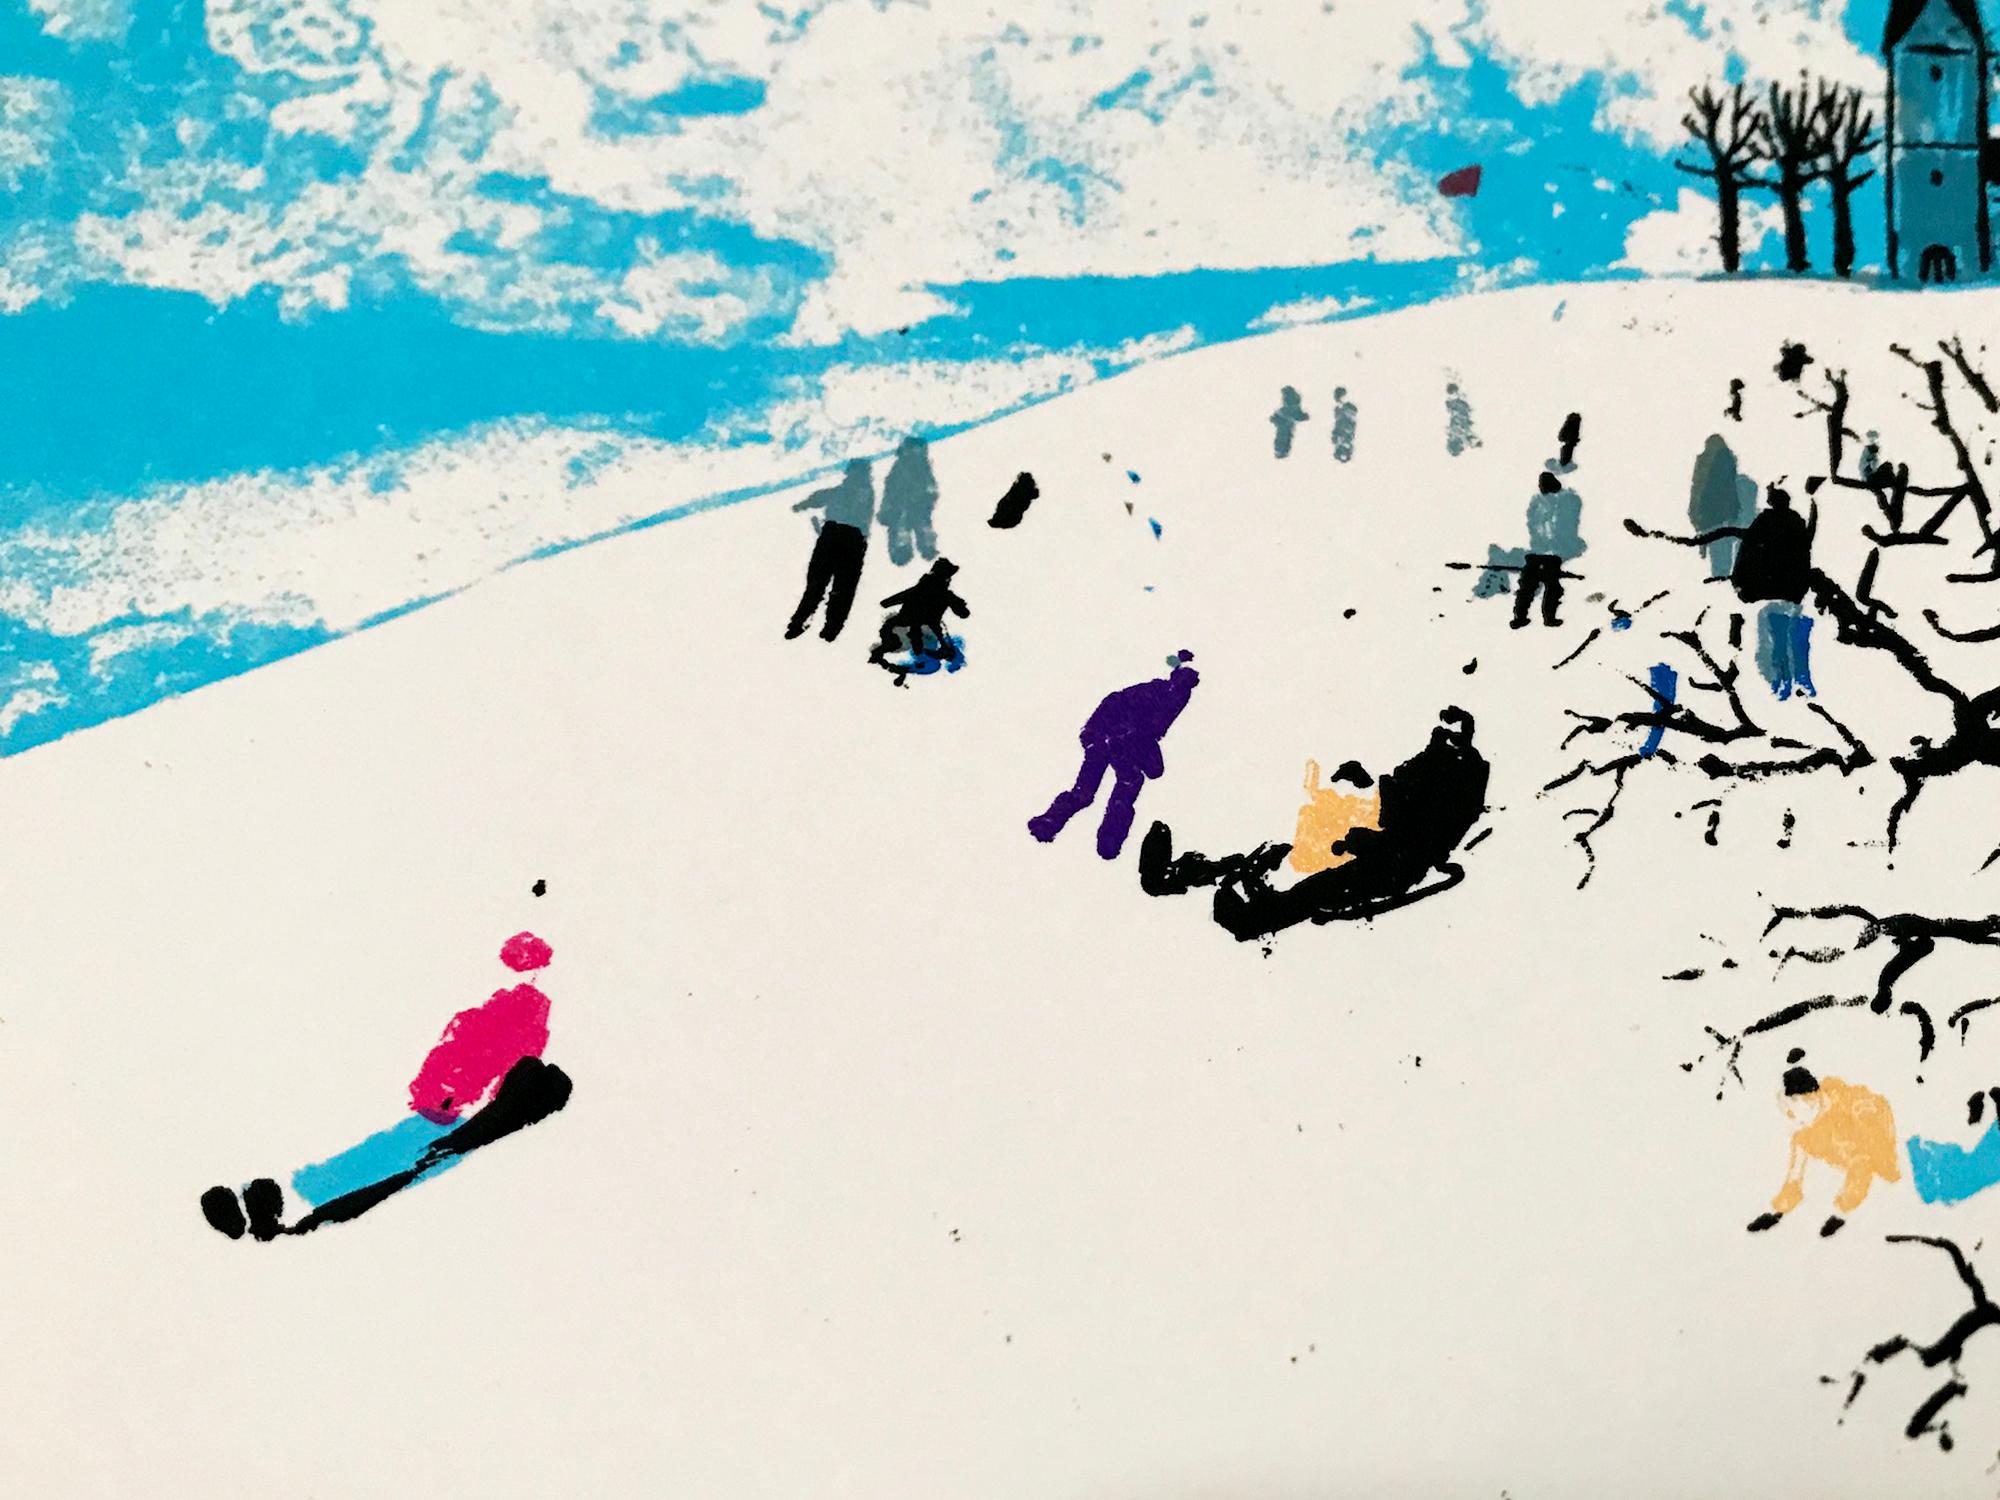 Tim Southall, Snow on the Hill, Landscape Art, Affordable Art, Winter Scene Art For Sale 2